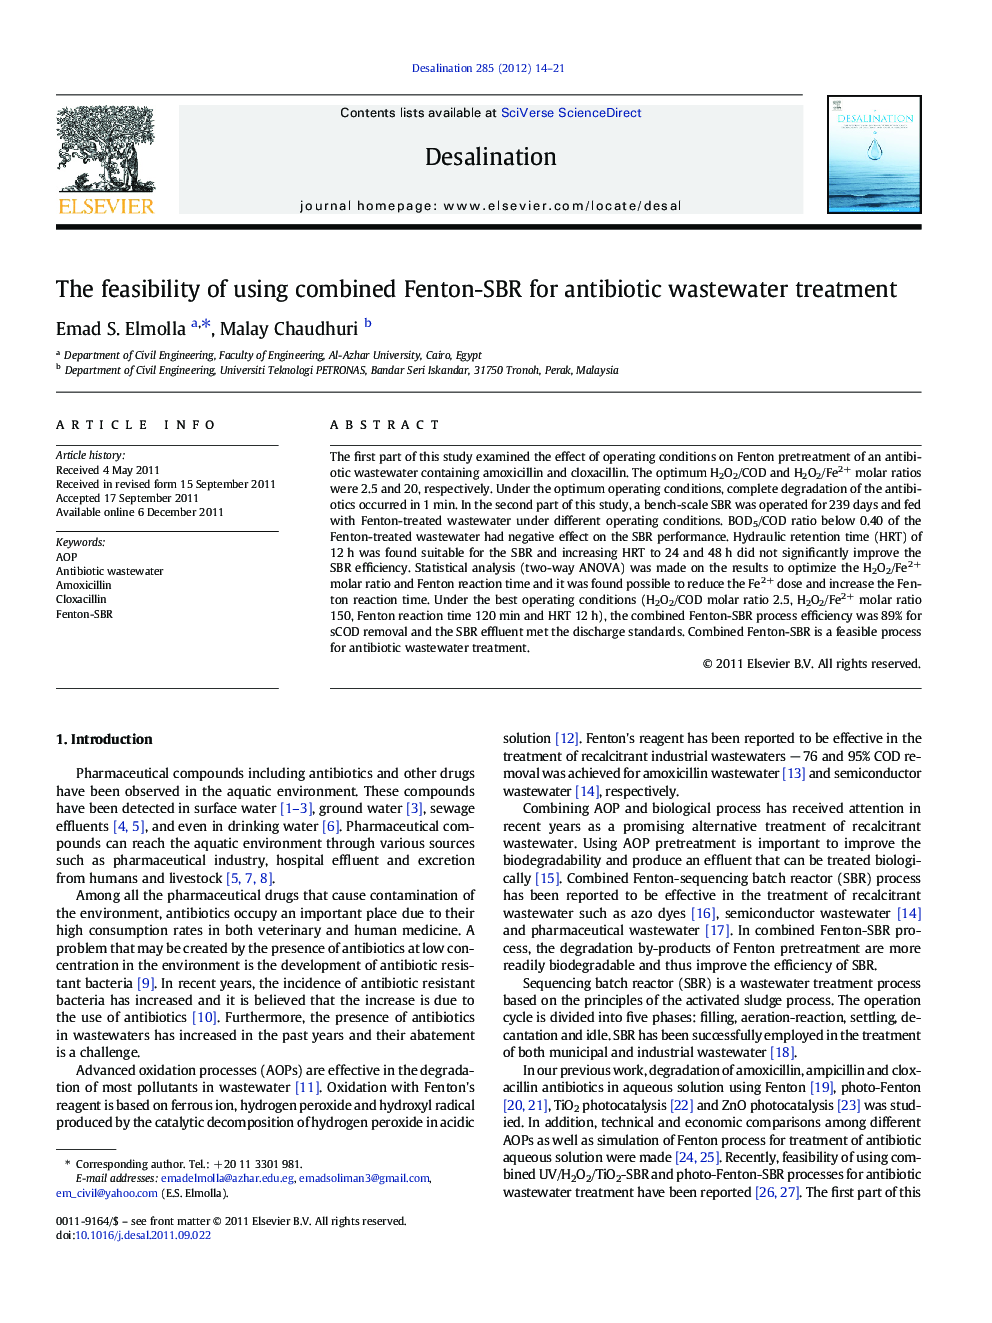 The feasibility of using combined Fenton-SBR for antibiotic wastewater treatment